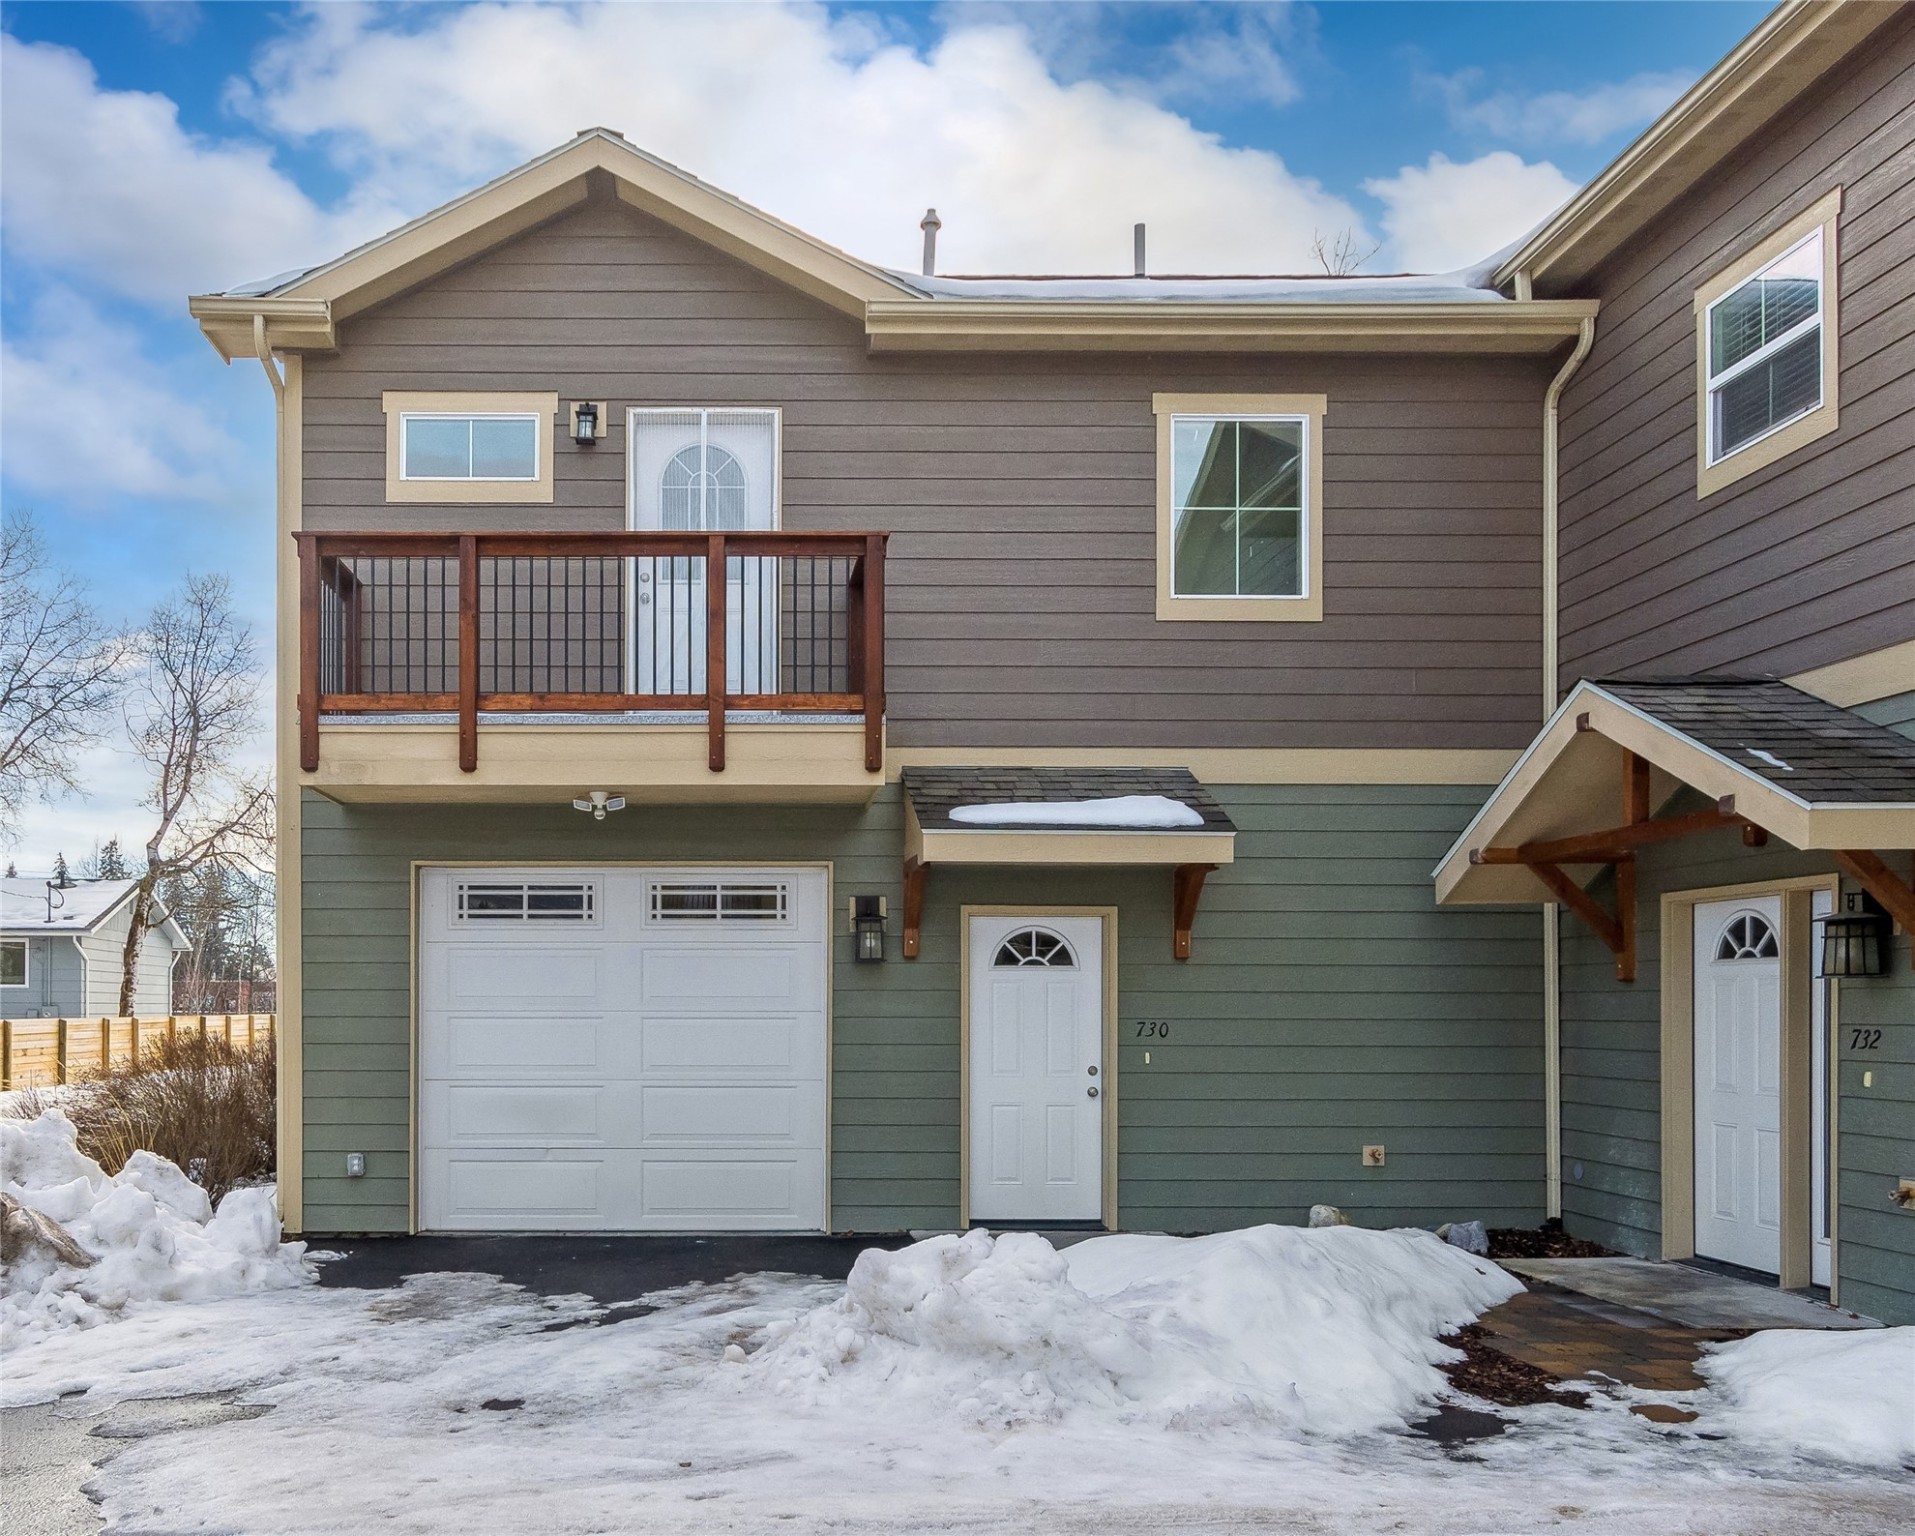 Right in the heart of Whitefish!  This 2 bedroom, 2 bath unit is located just a short walk into downtown Whitefish.  Additional features include an attached one car garage, tiled shower, newer construction, deck, and stainless appliances.  Agent owned.